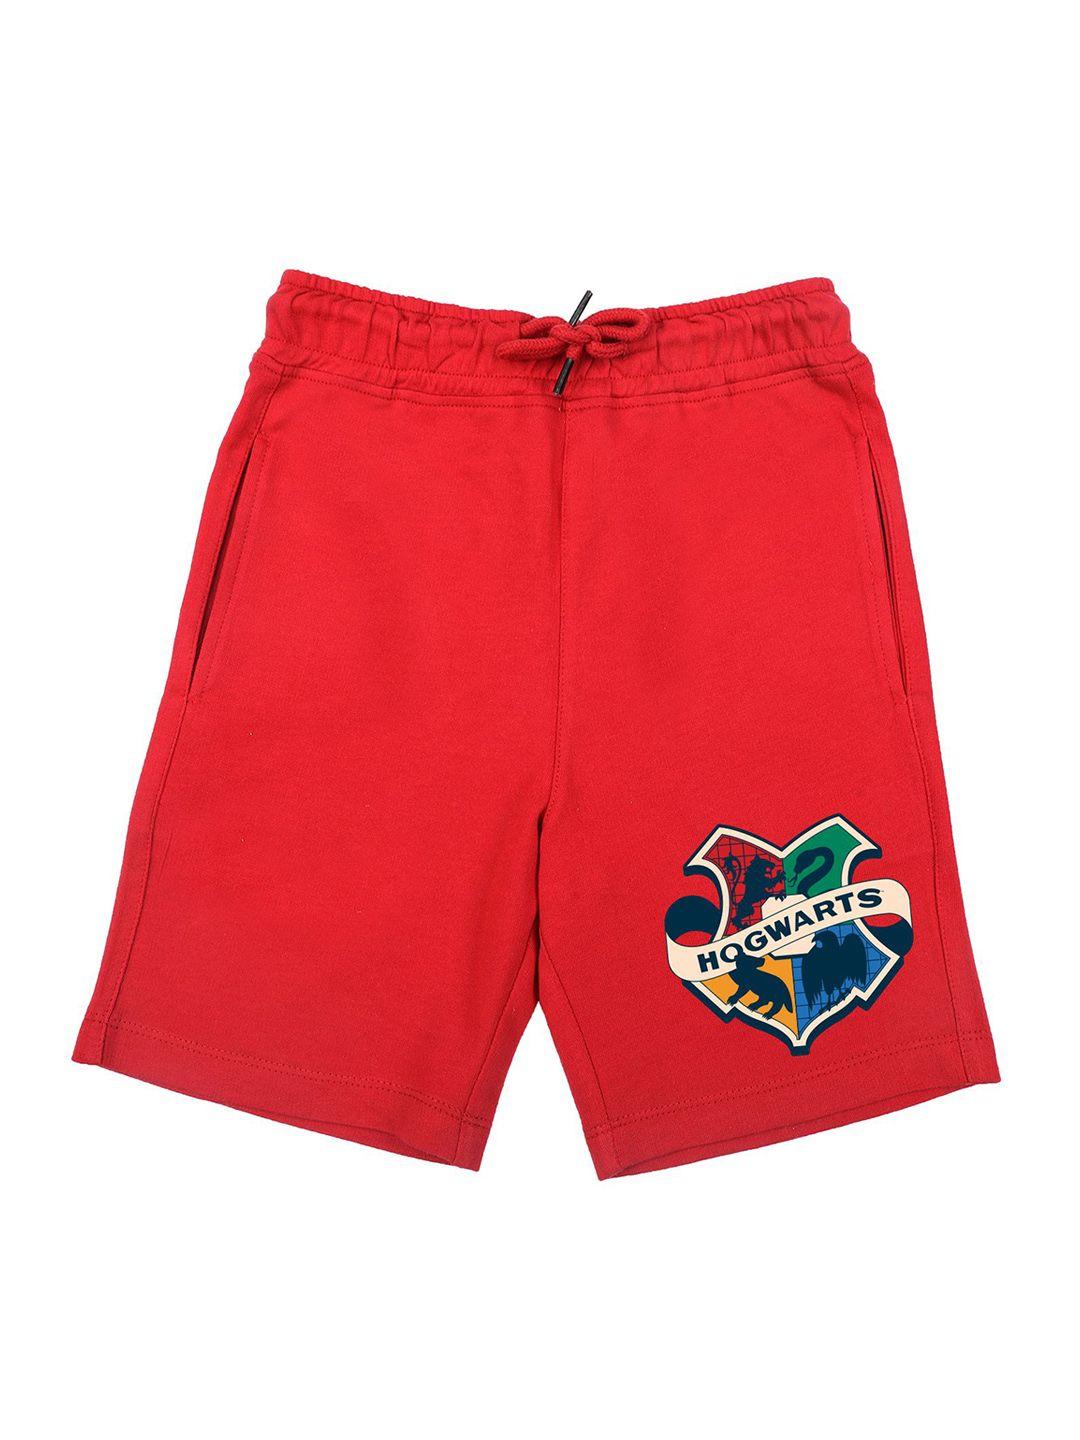 Harry Potter by Wear Your Mind Boys Red Printed Harry Potter Shorts